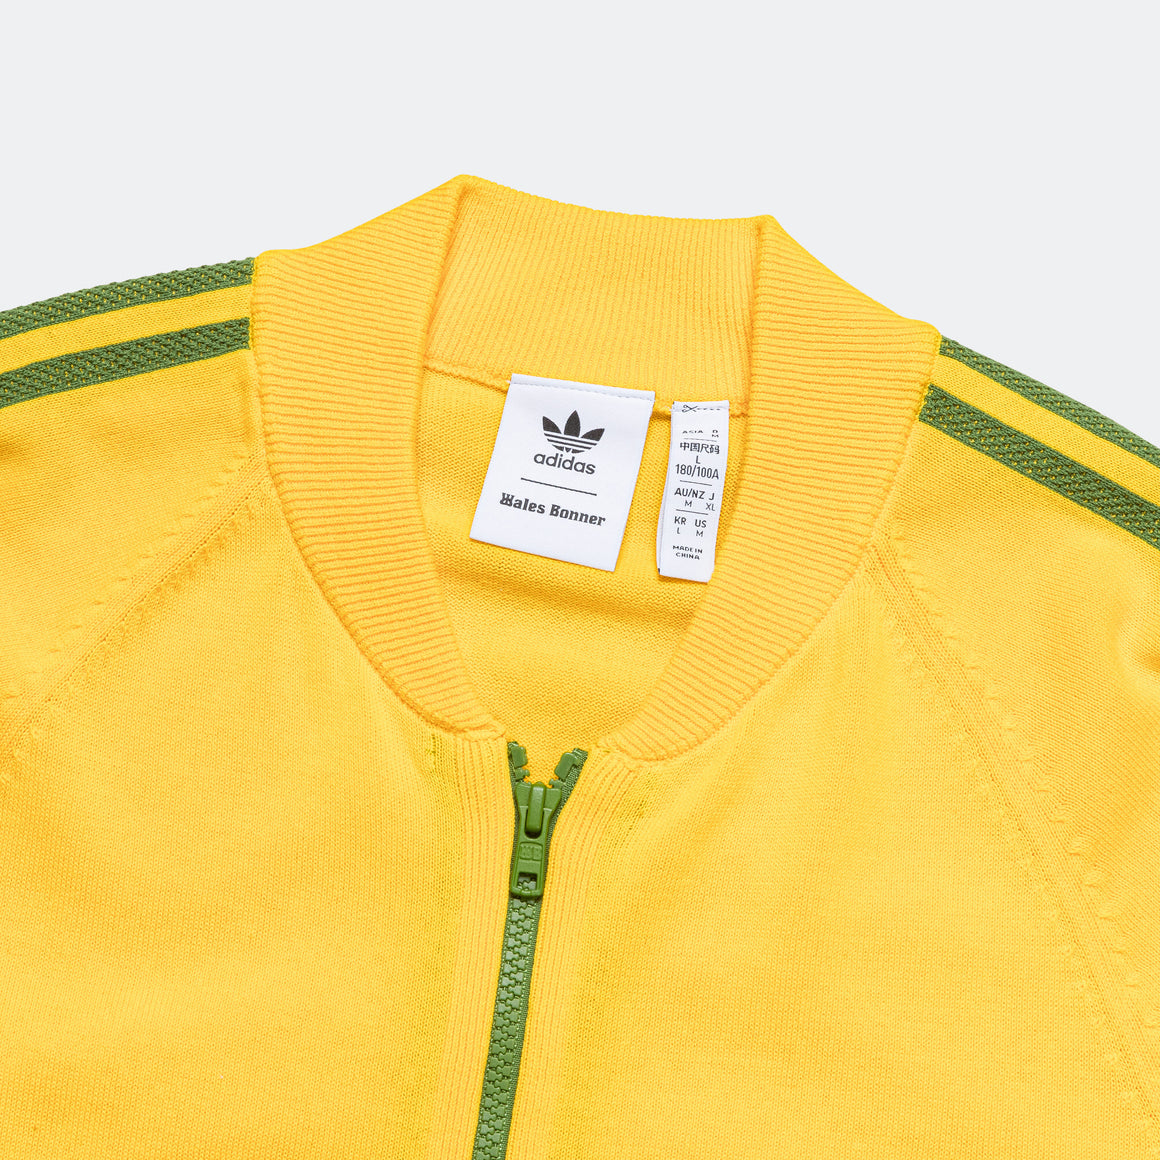 adidas - Knit Track Top x Wales Bonner - Bold Gold/Crew Green - UP THERE